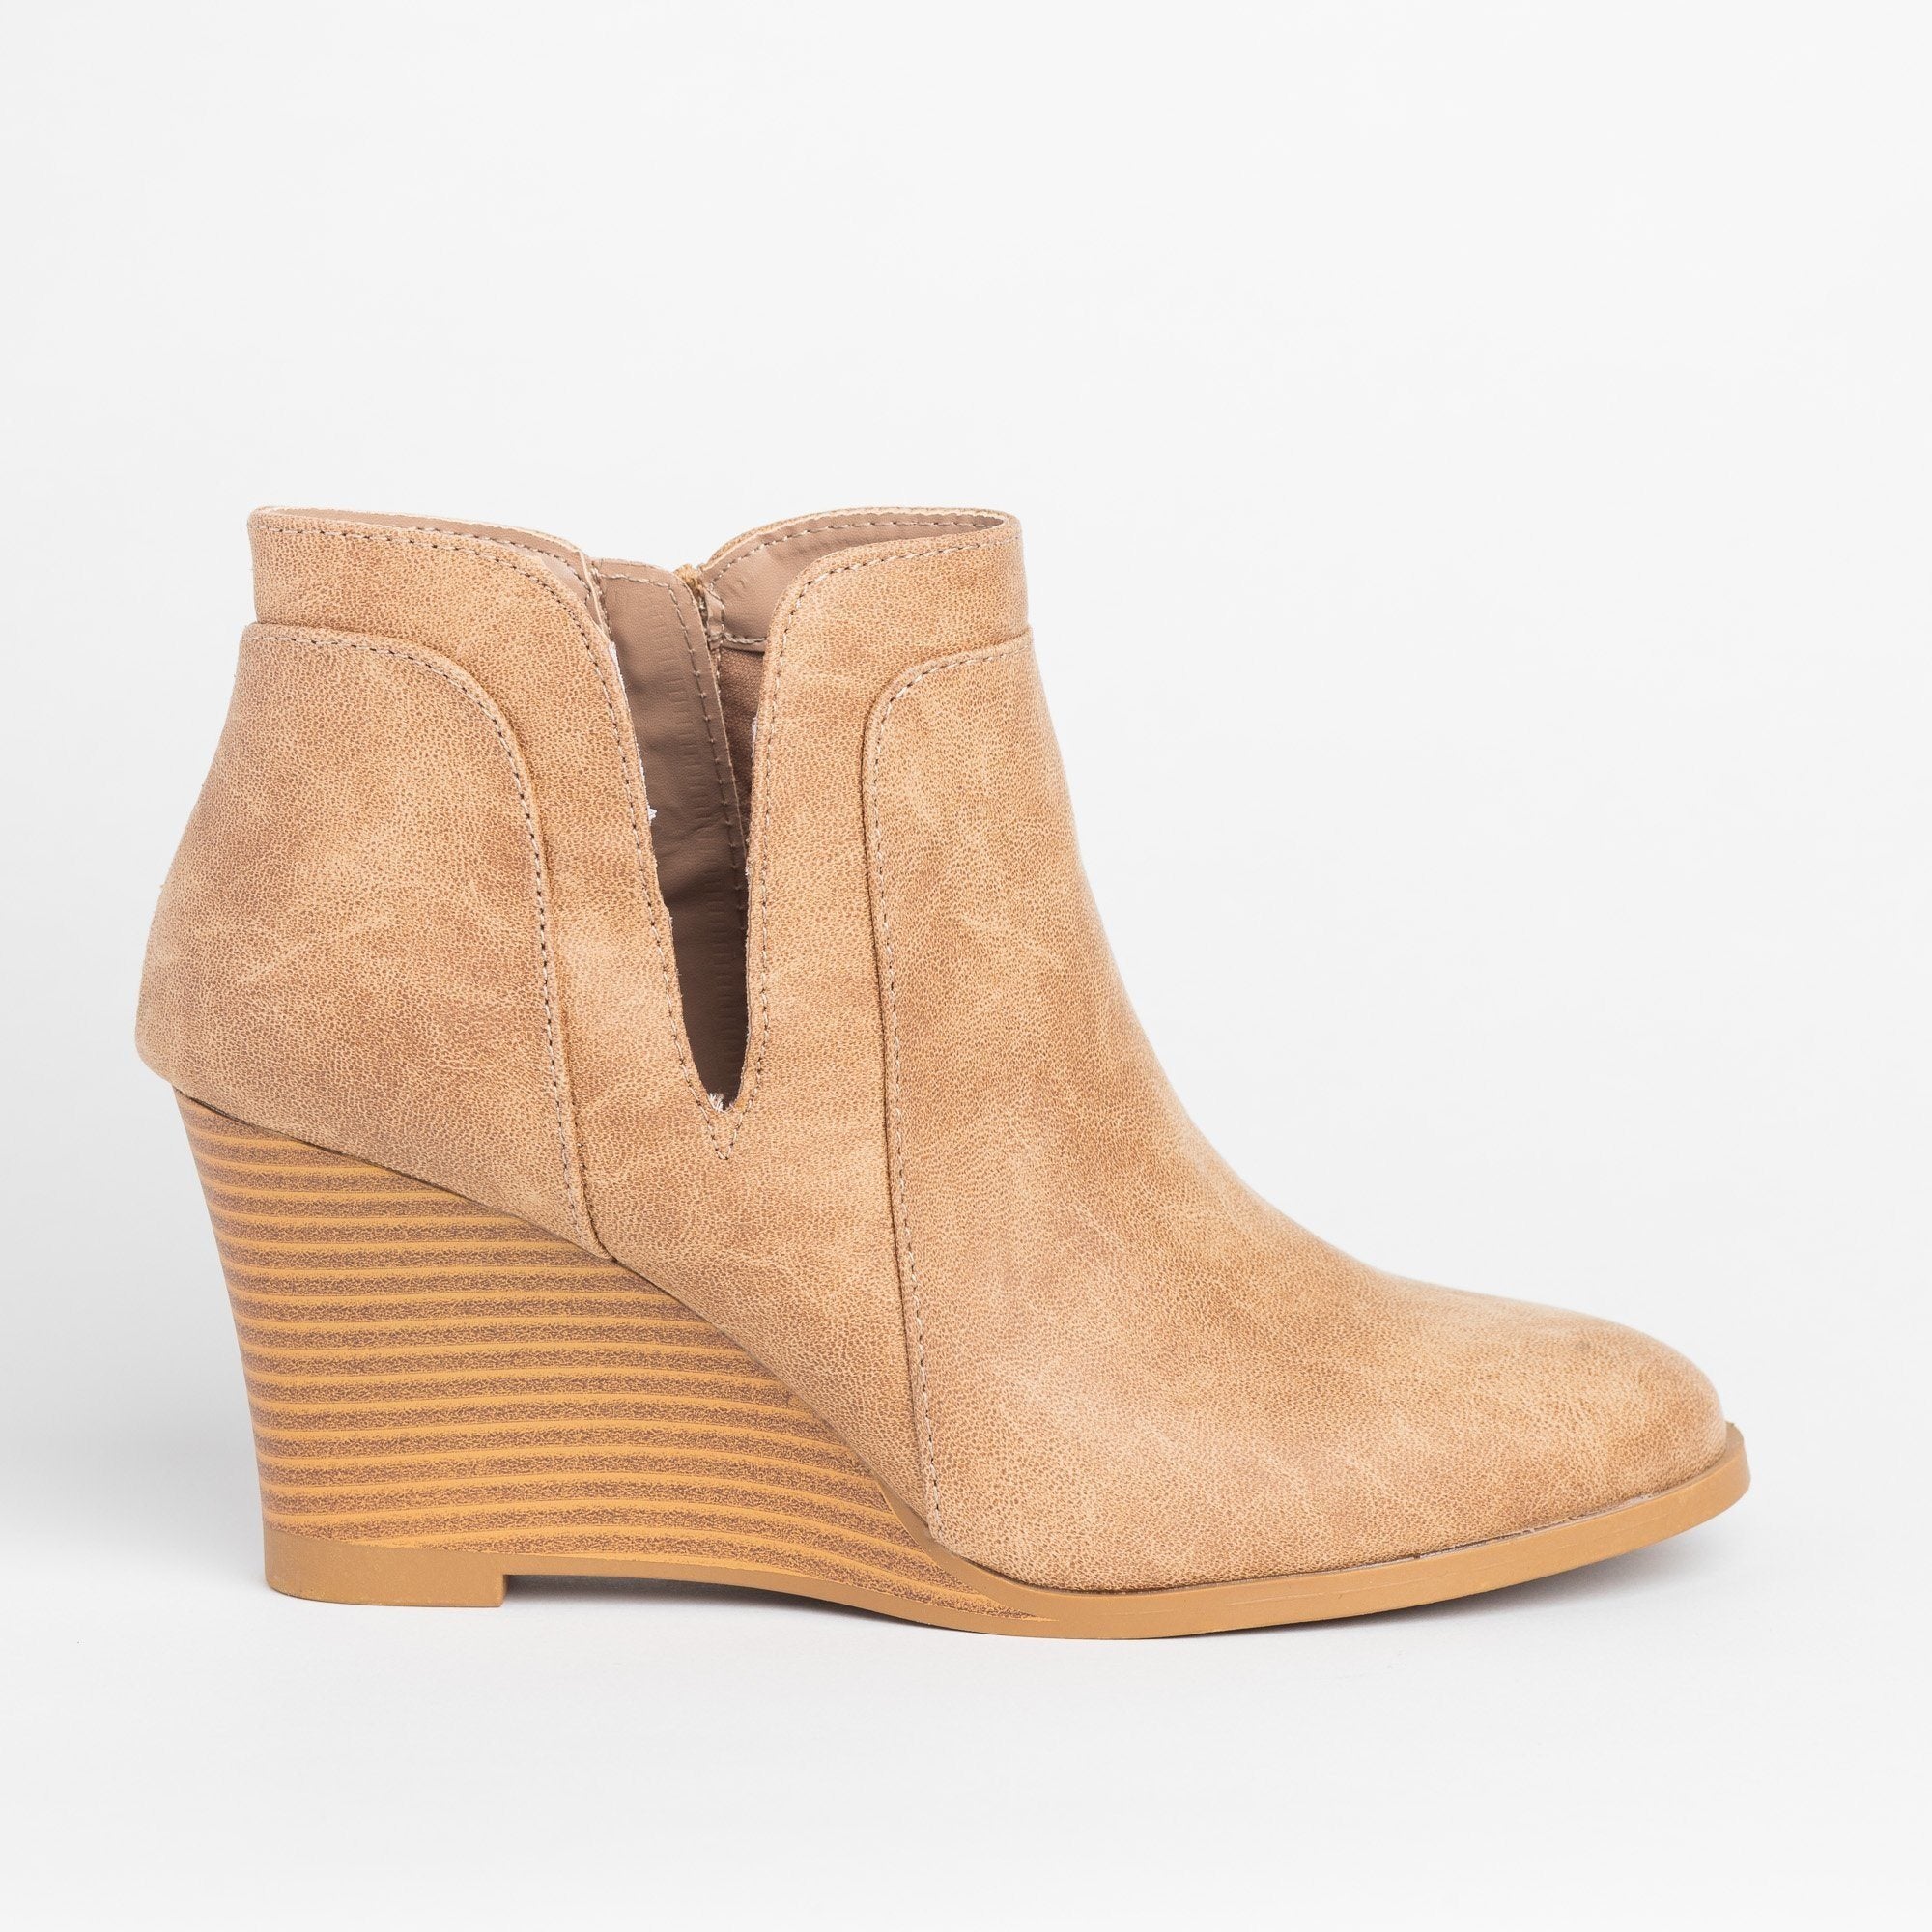 Posh Ankle Bootie Wedges - Qupid Shoes 